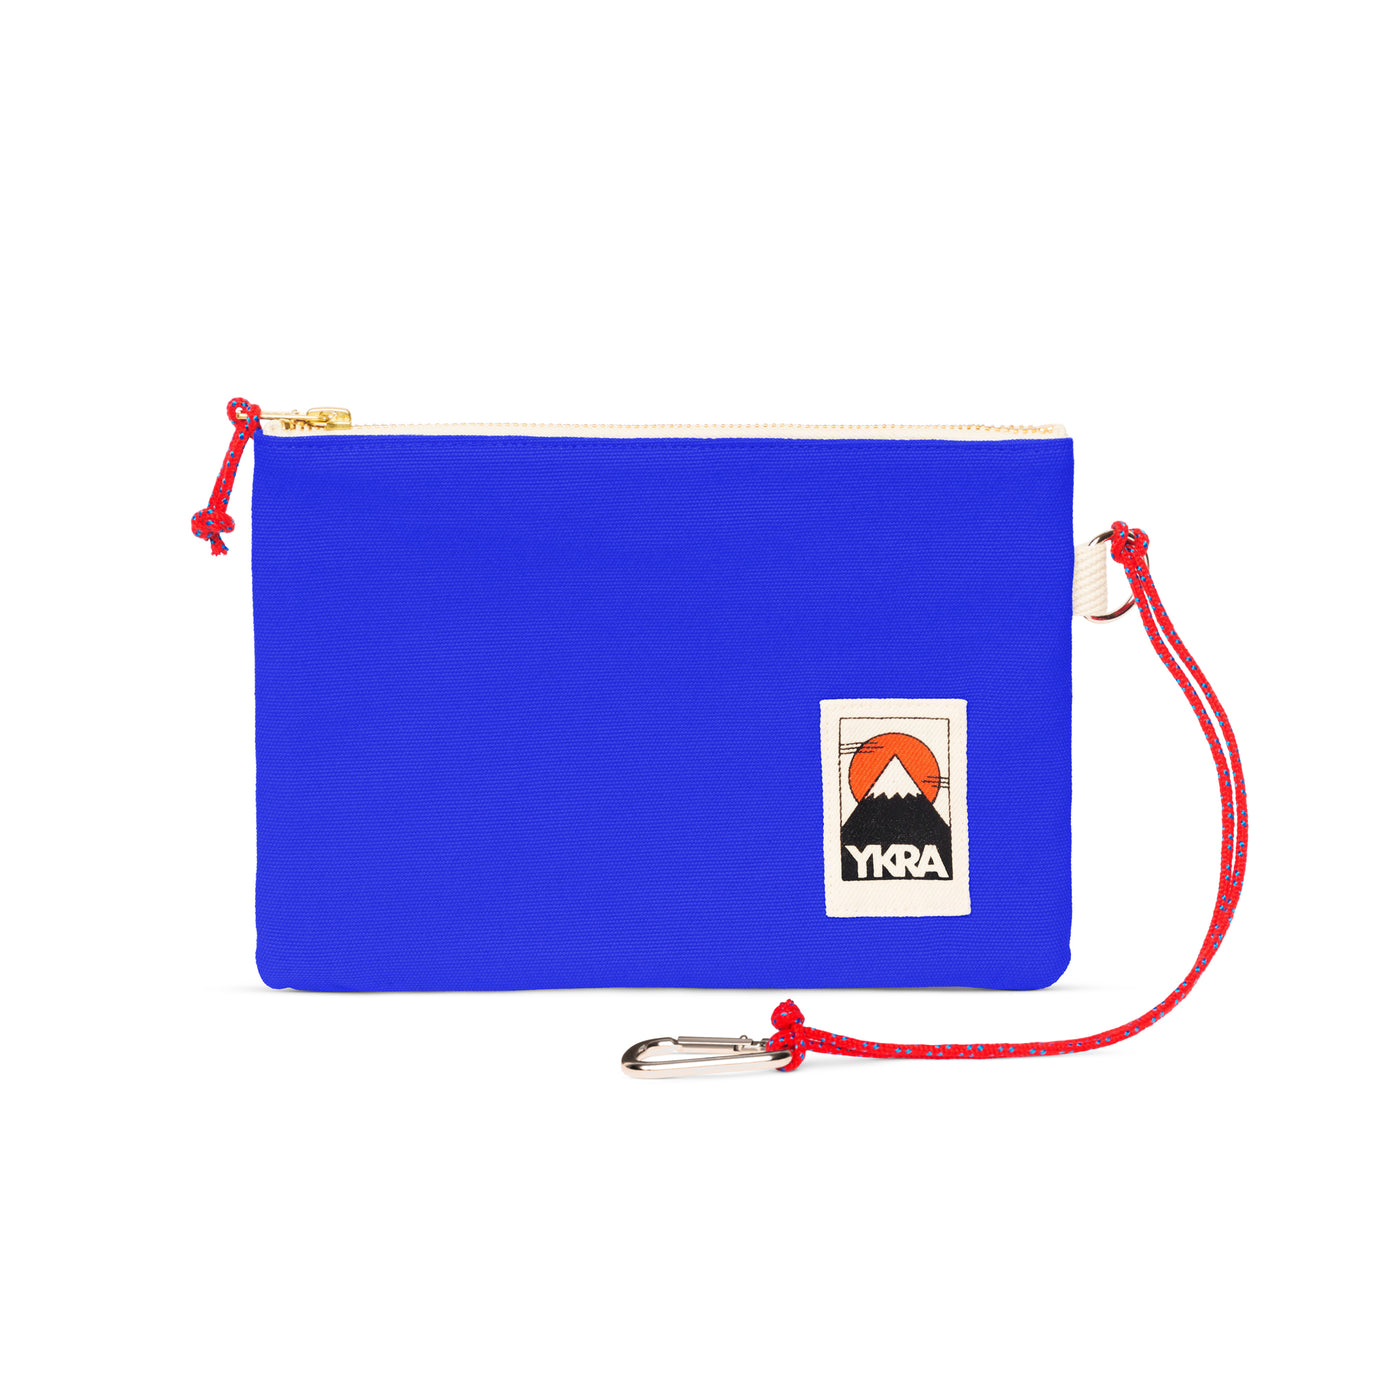 ykra pouch - blue